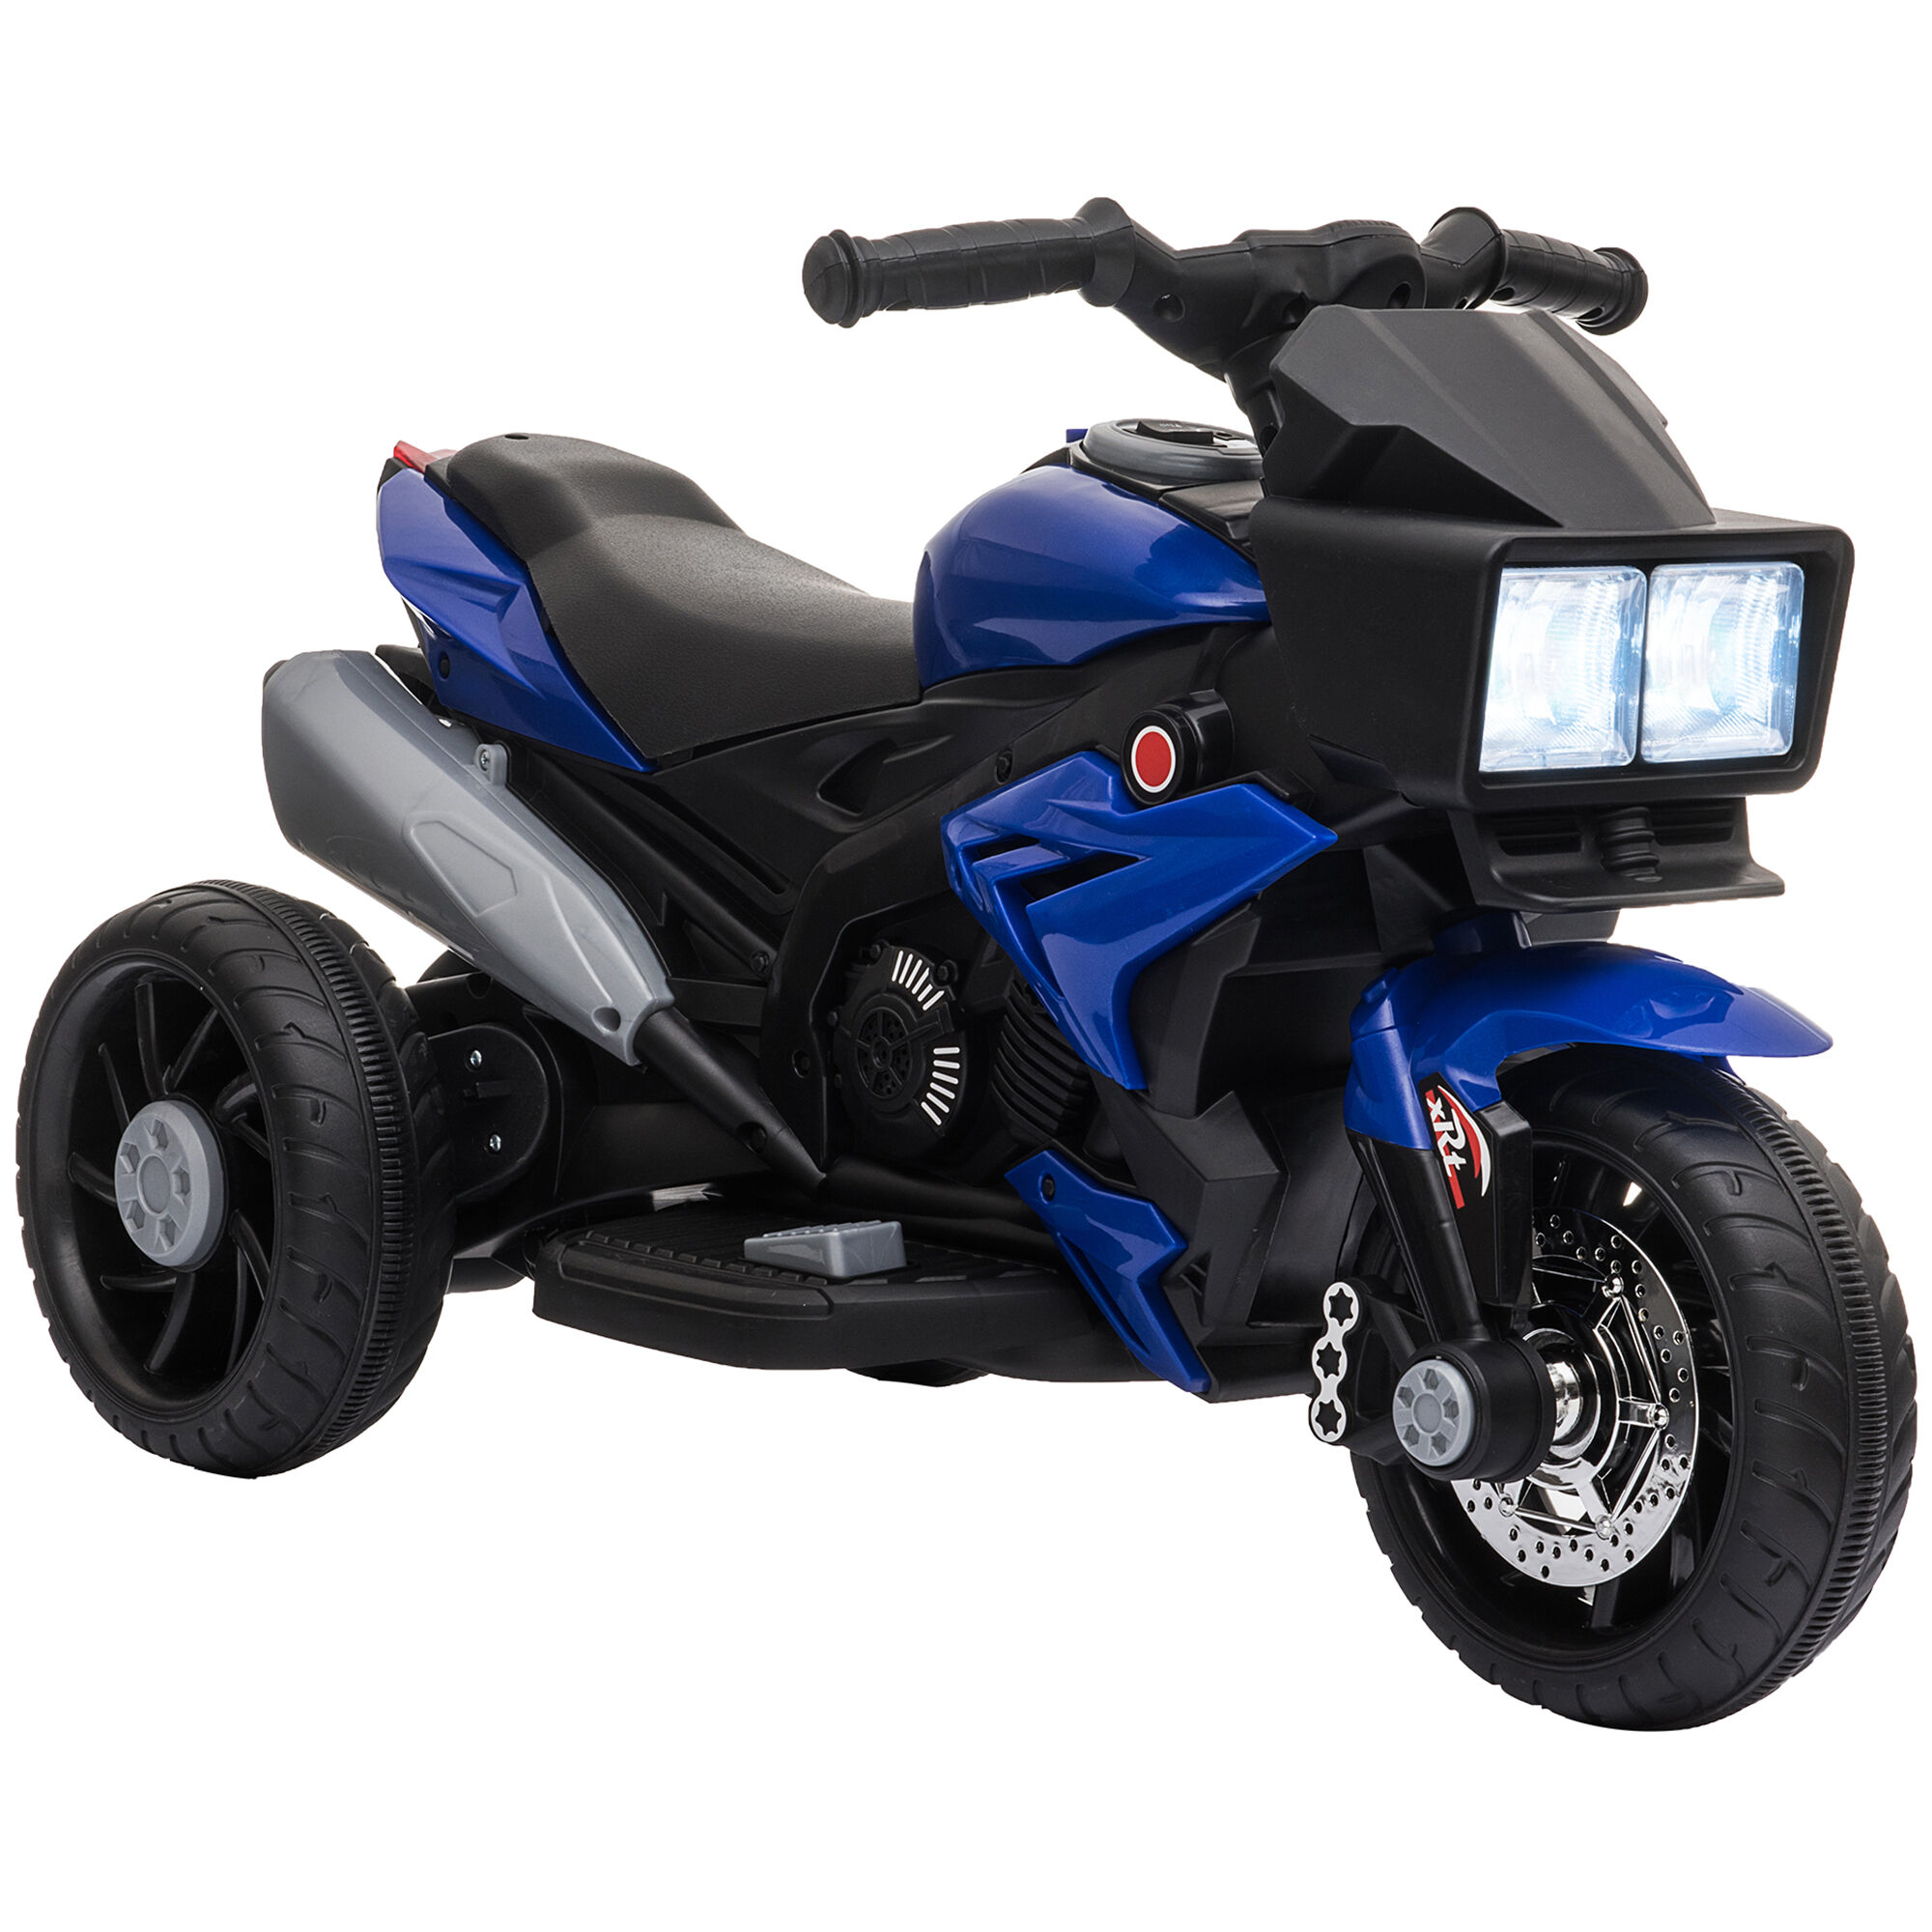 Aosom Electric Motorbike for Kids 6V Ride-On Motorcycle Toy with Music Horn Headlights Blue   Aosom.com